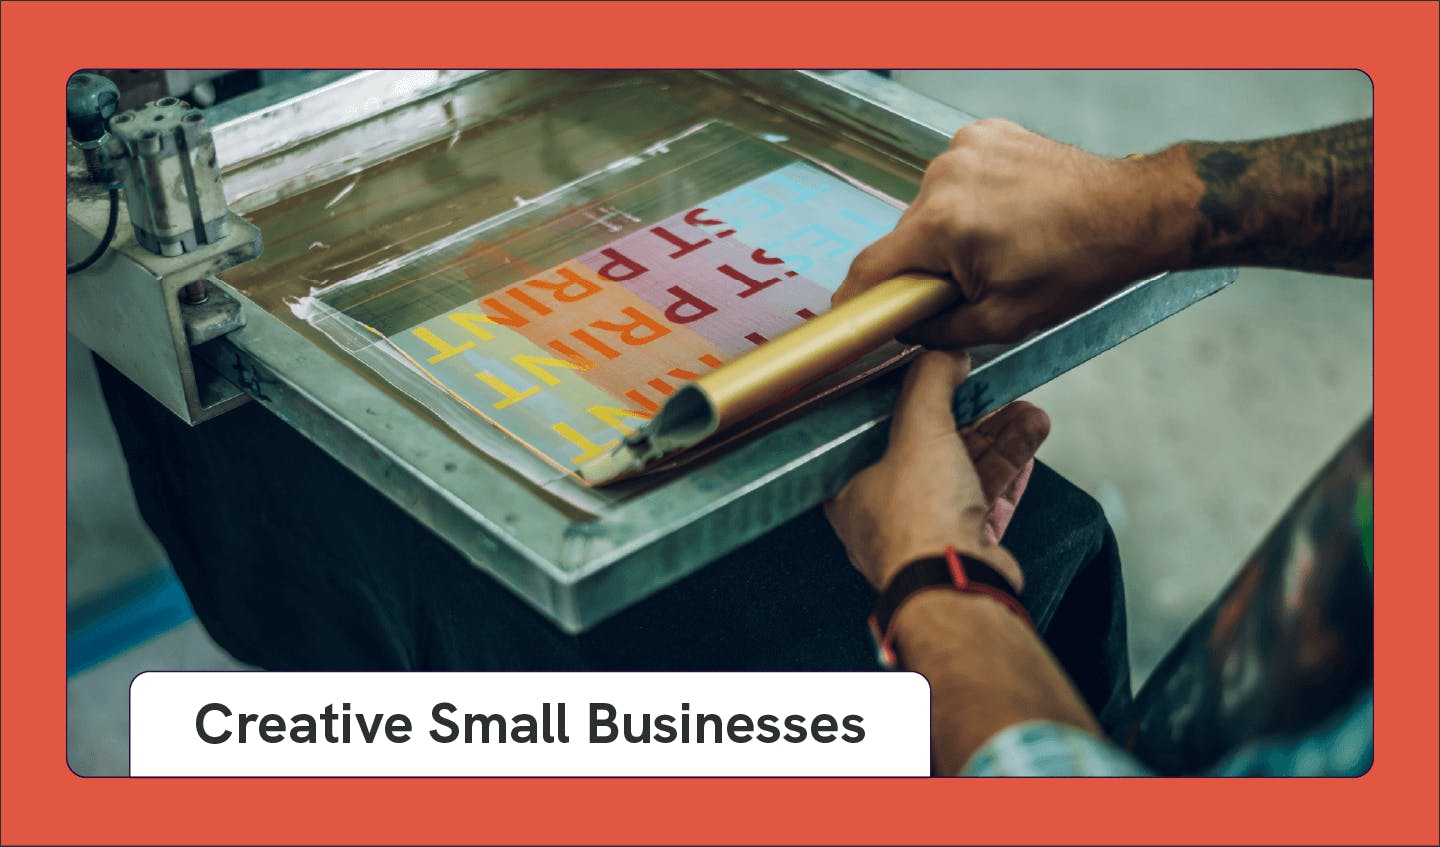 Photograph of a person screenprinting as an example of a small business idea with text that says “Creative Small Businesses.”